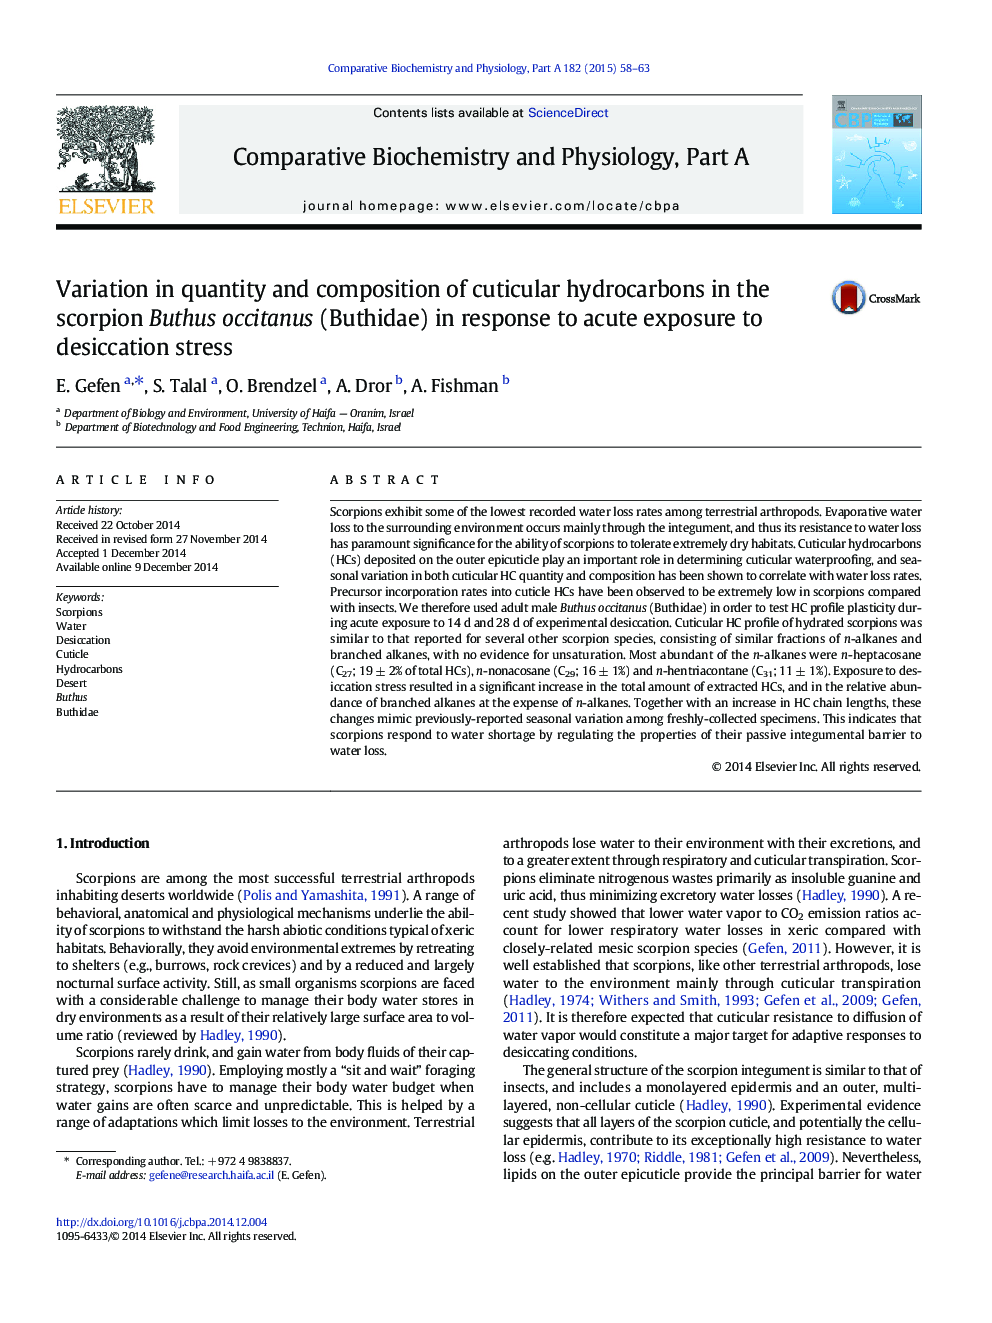 Variation in quantity and composition of cuticular hydrocarbons in the scorpion Buthus occitanus (Buthidae) in response to acute exposure to desiccation stress